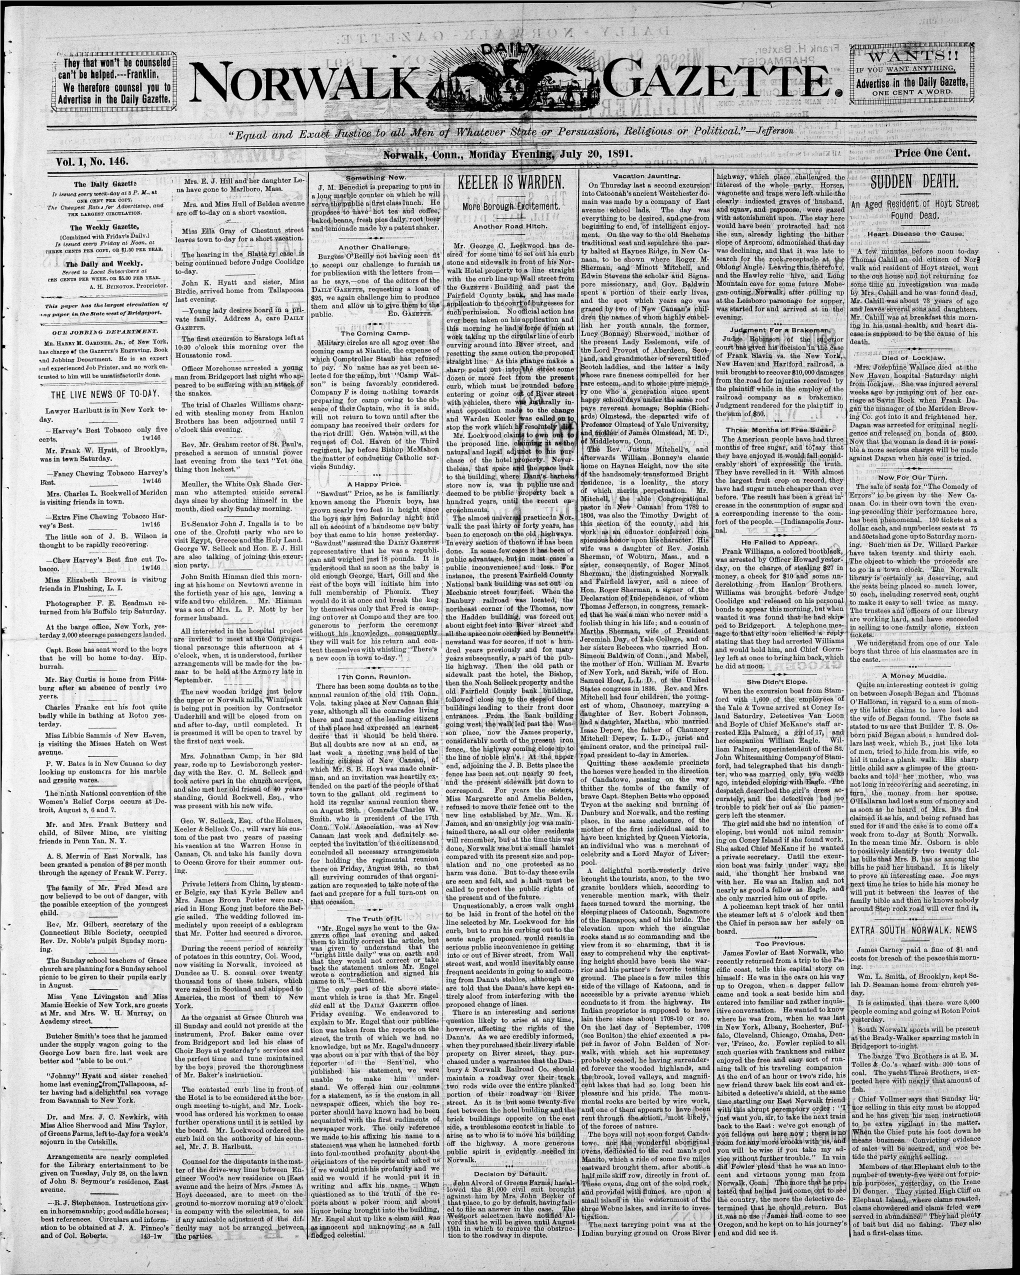 Franklin, Advertise in the Daily Gazette